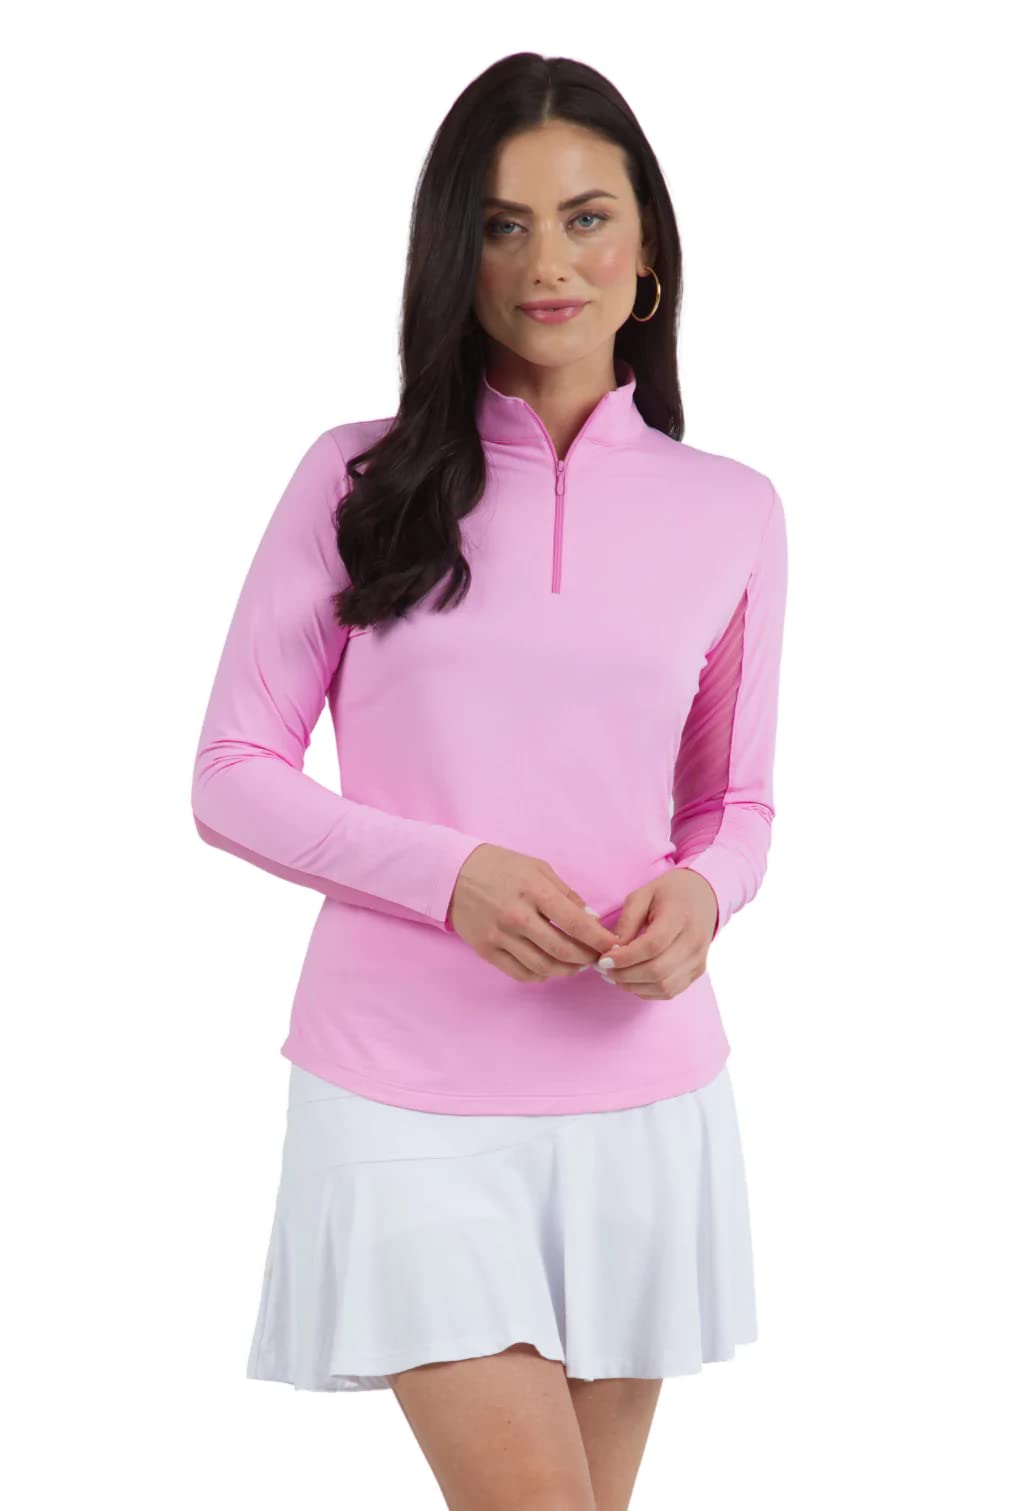 IBKUL Athleisure Wear Sun Protective UPF 50+ Icefil Cooling Tech Long Sleeve Mock Neck Top with Under Arm Mesh 80000 Jade Solid S